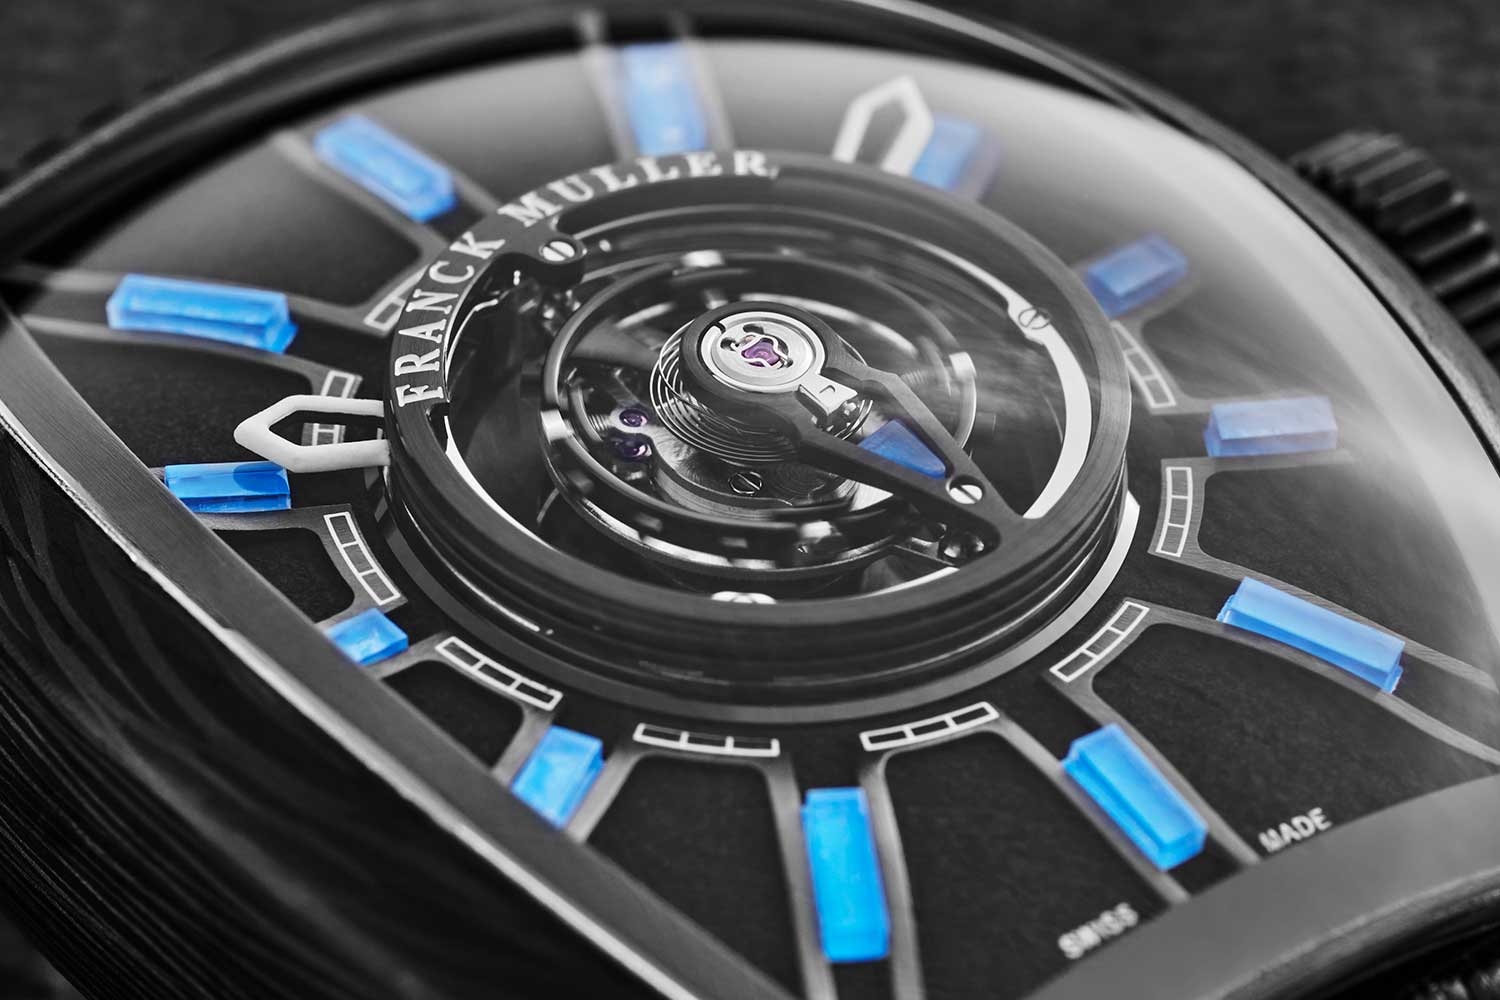 This watch is a new eye-catching rendition of Franck Muller's Grand Central Tourbillon watch, which is the world’s first tonneau-shaped central tourbillon watch